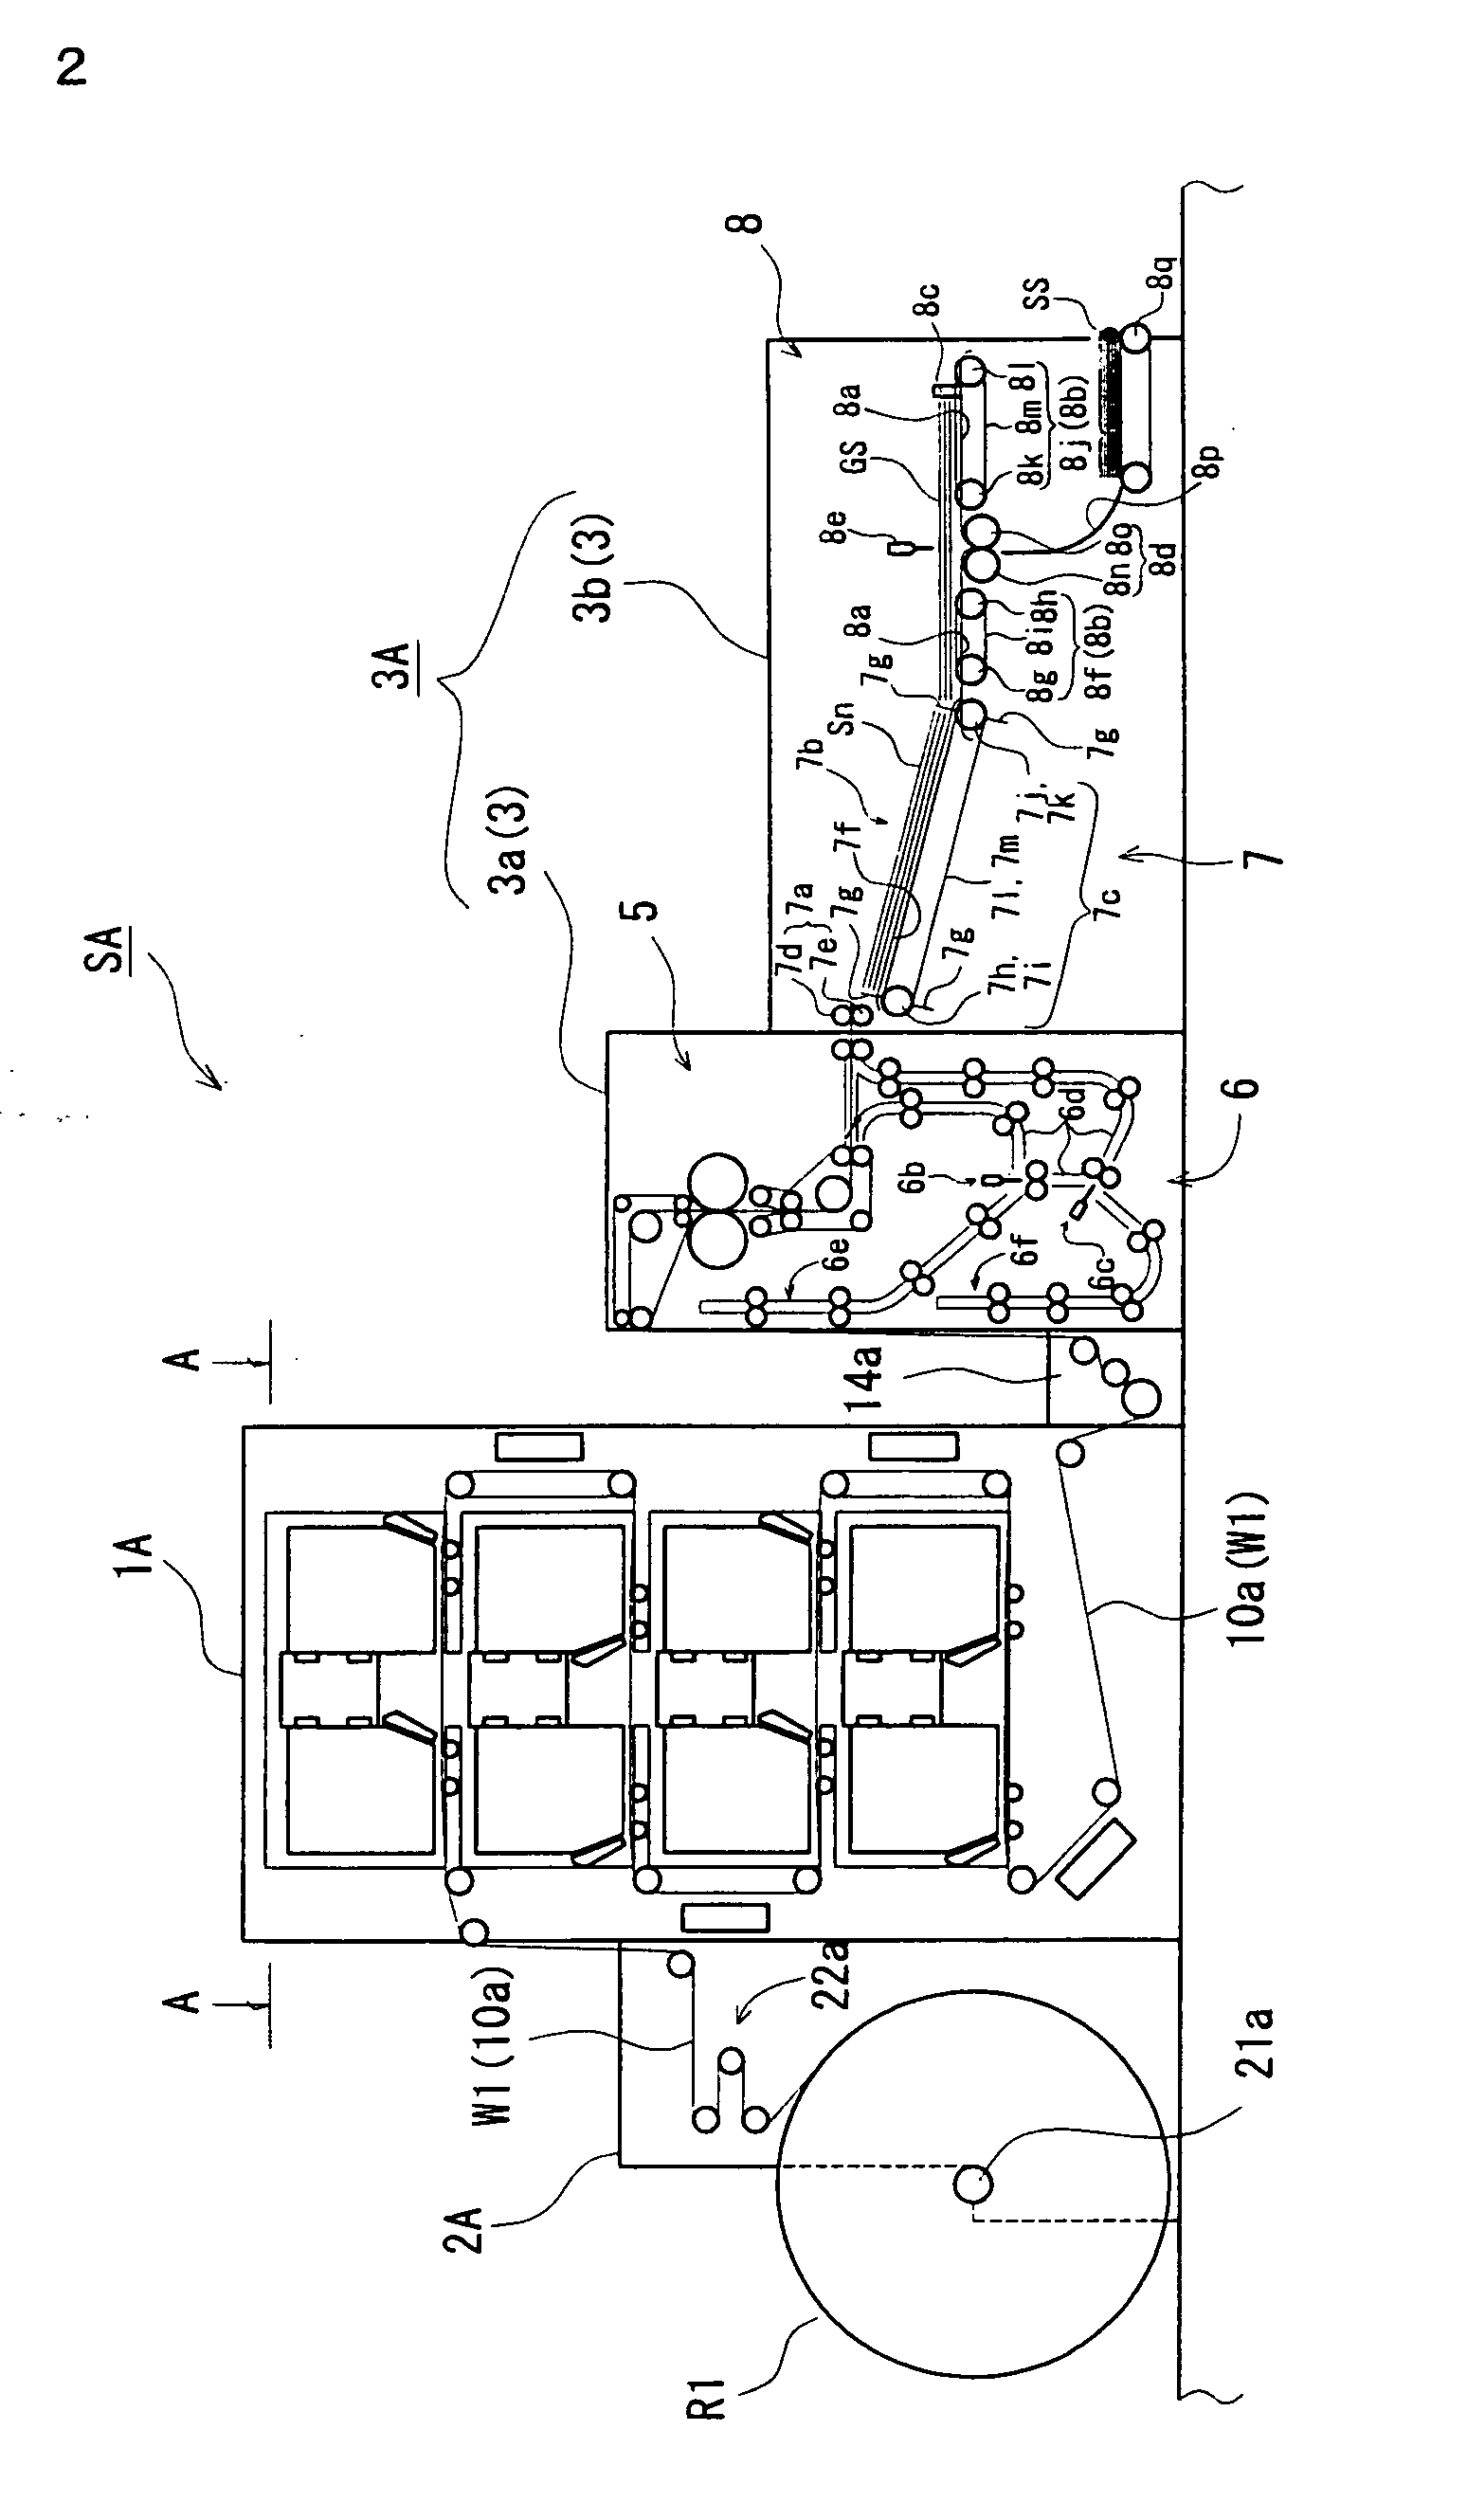 Newspaper production system and production method for newspaper